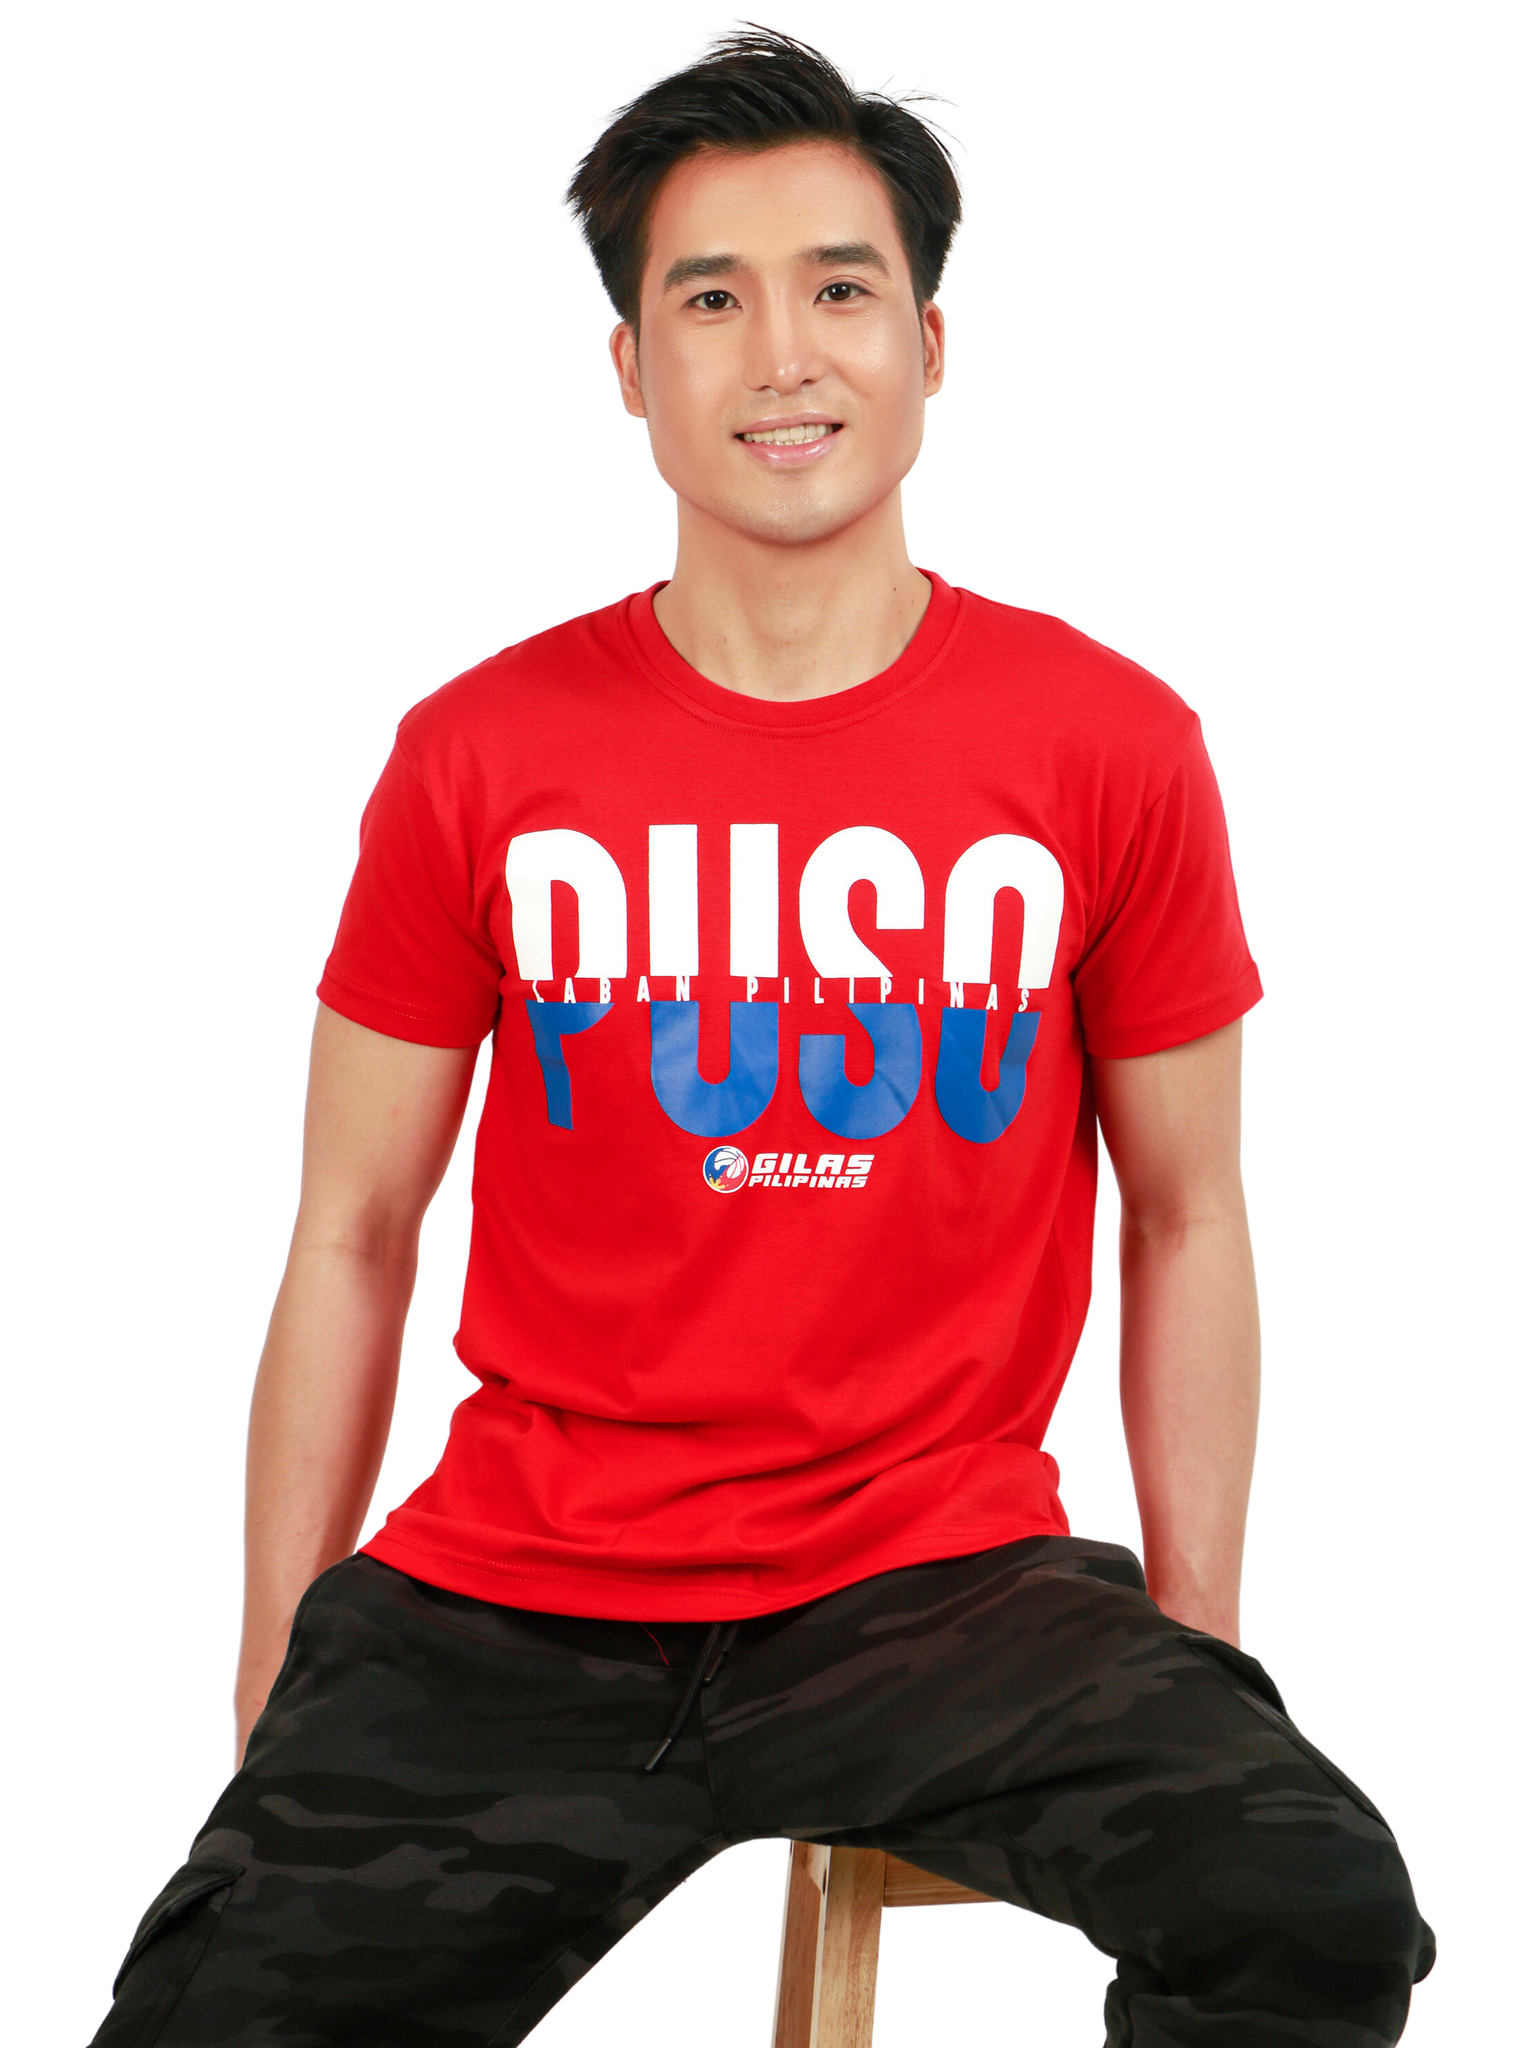 PUSO in Red for Mens